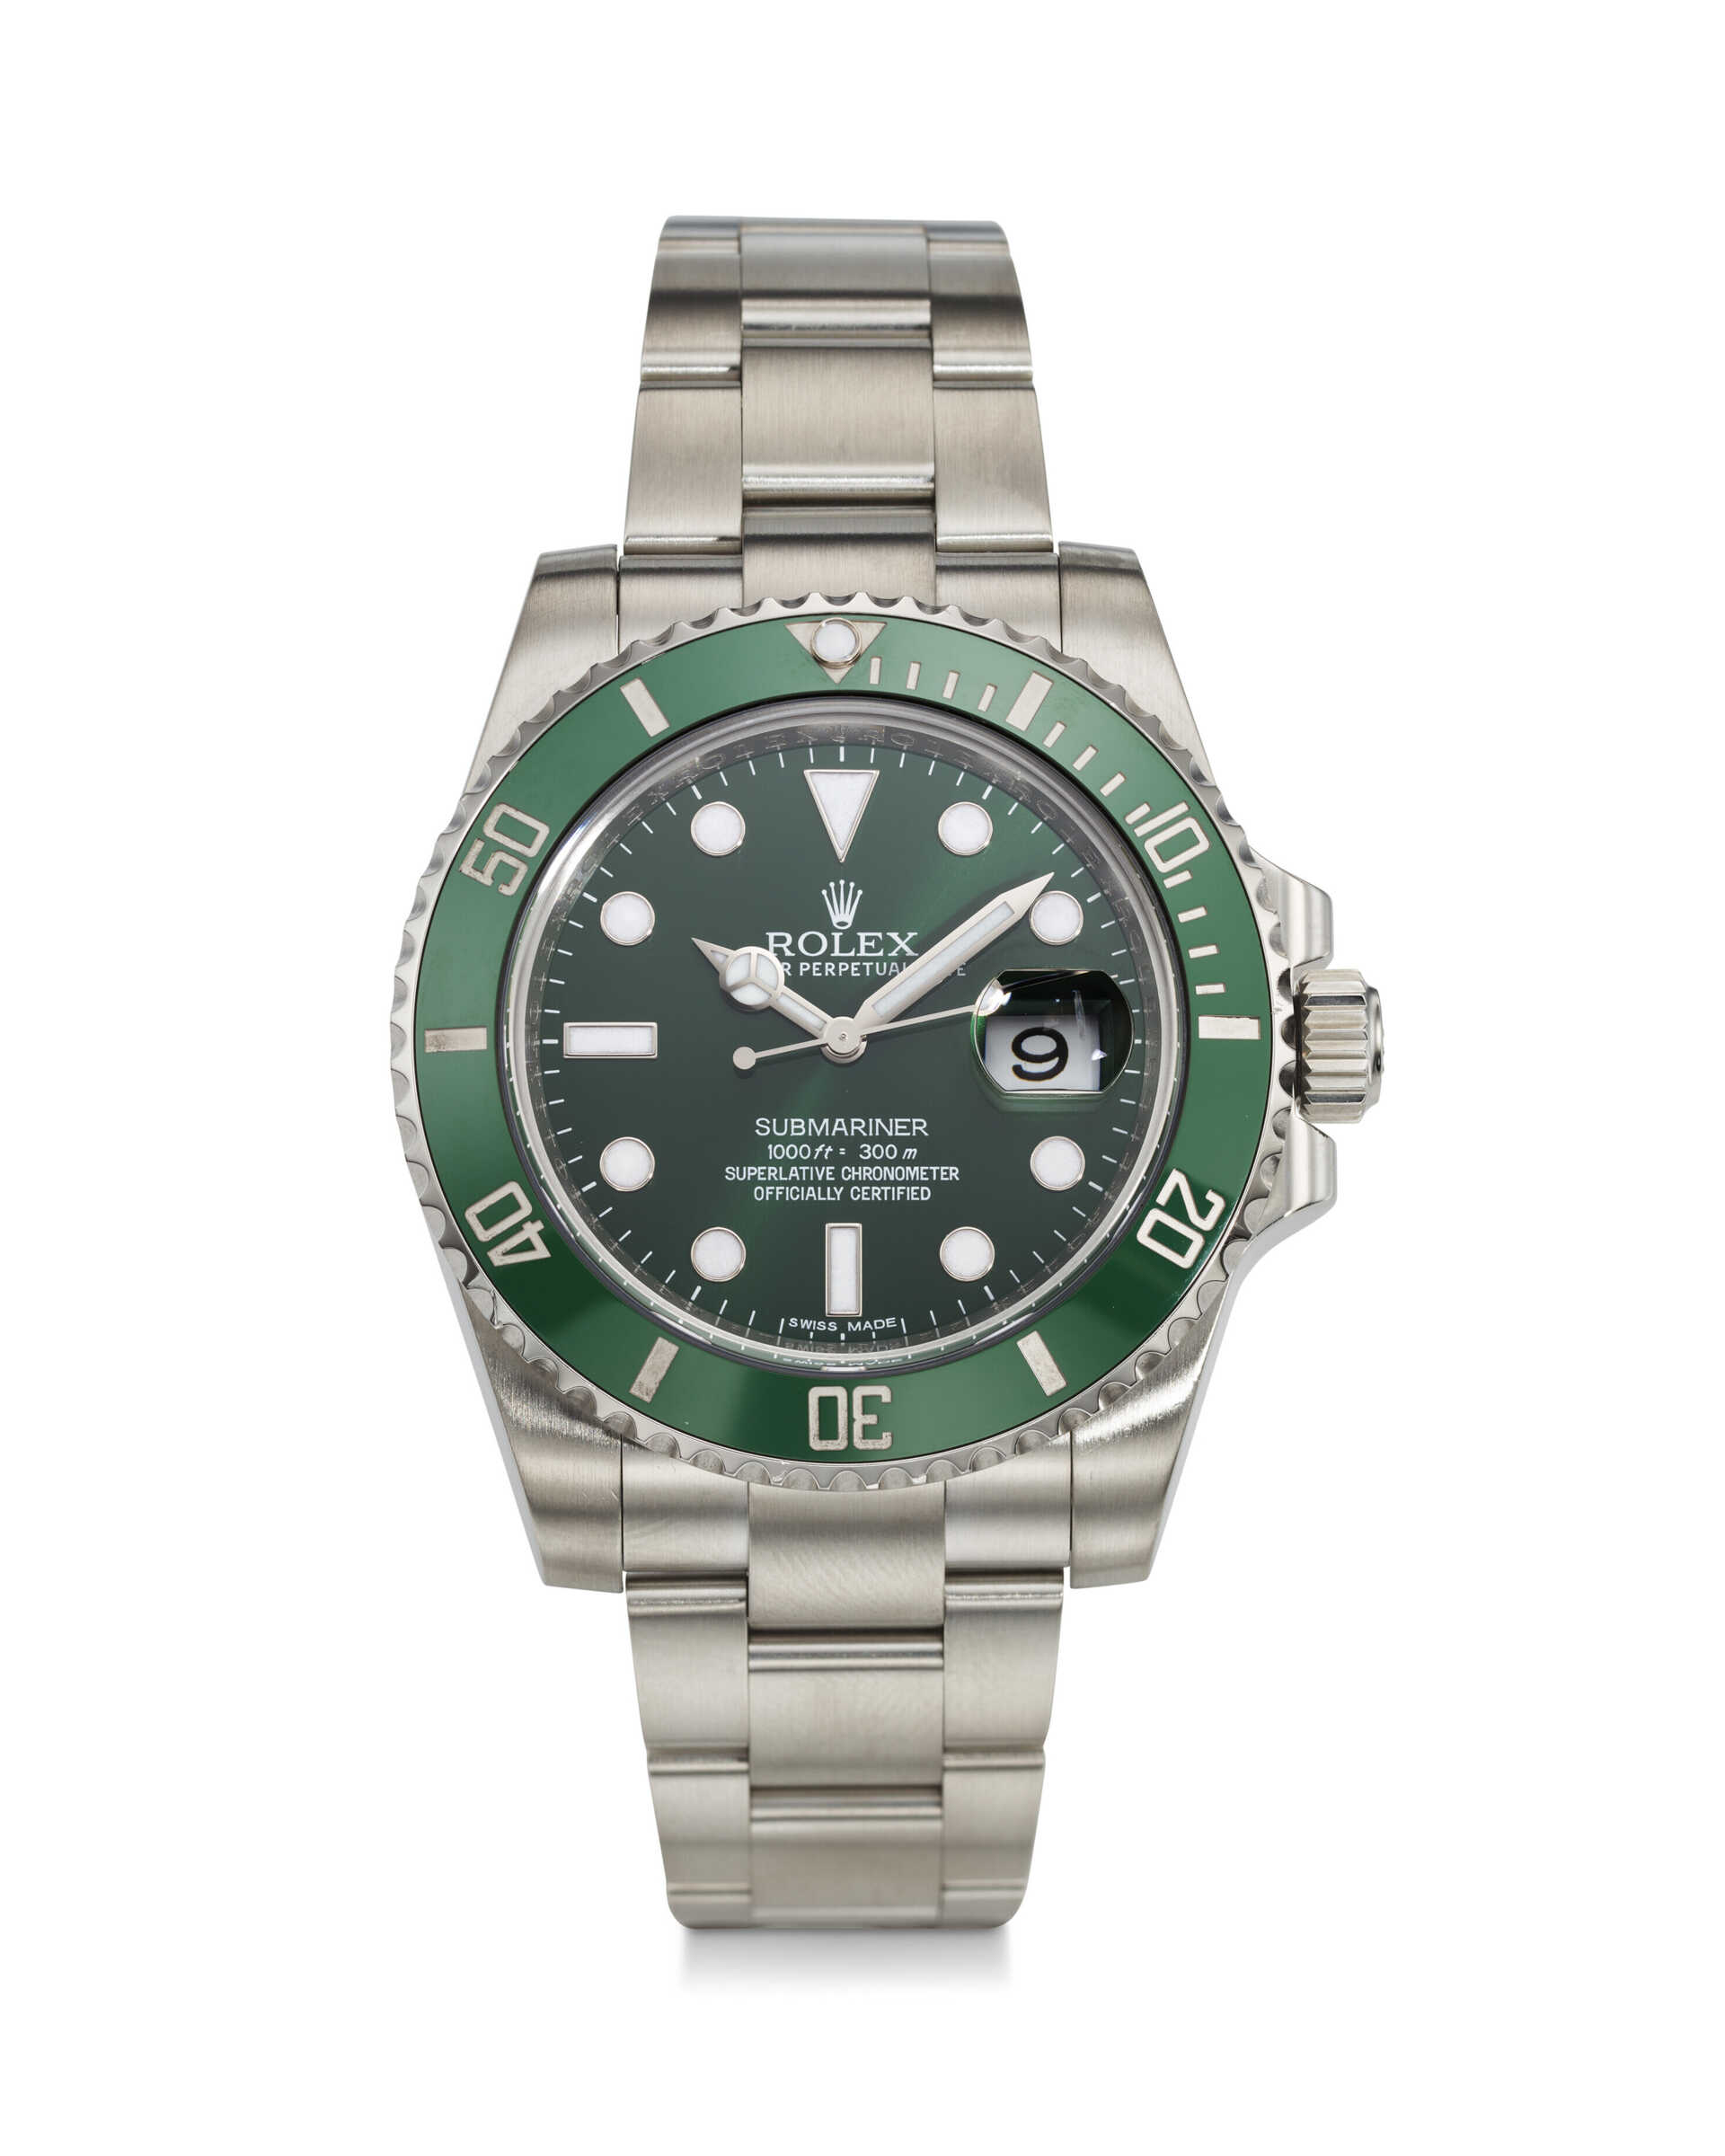 ROLEX, REF. 116610LV, SUBMARINER “HULK,” A STEEL DIVER’S WRISTWATCH WITH DATE AND GREEN DIAL